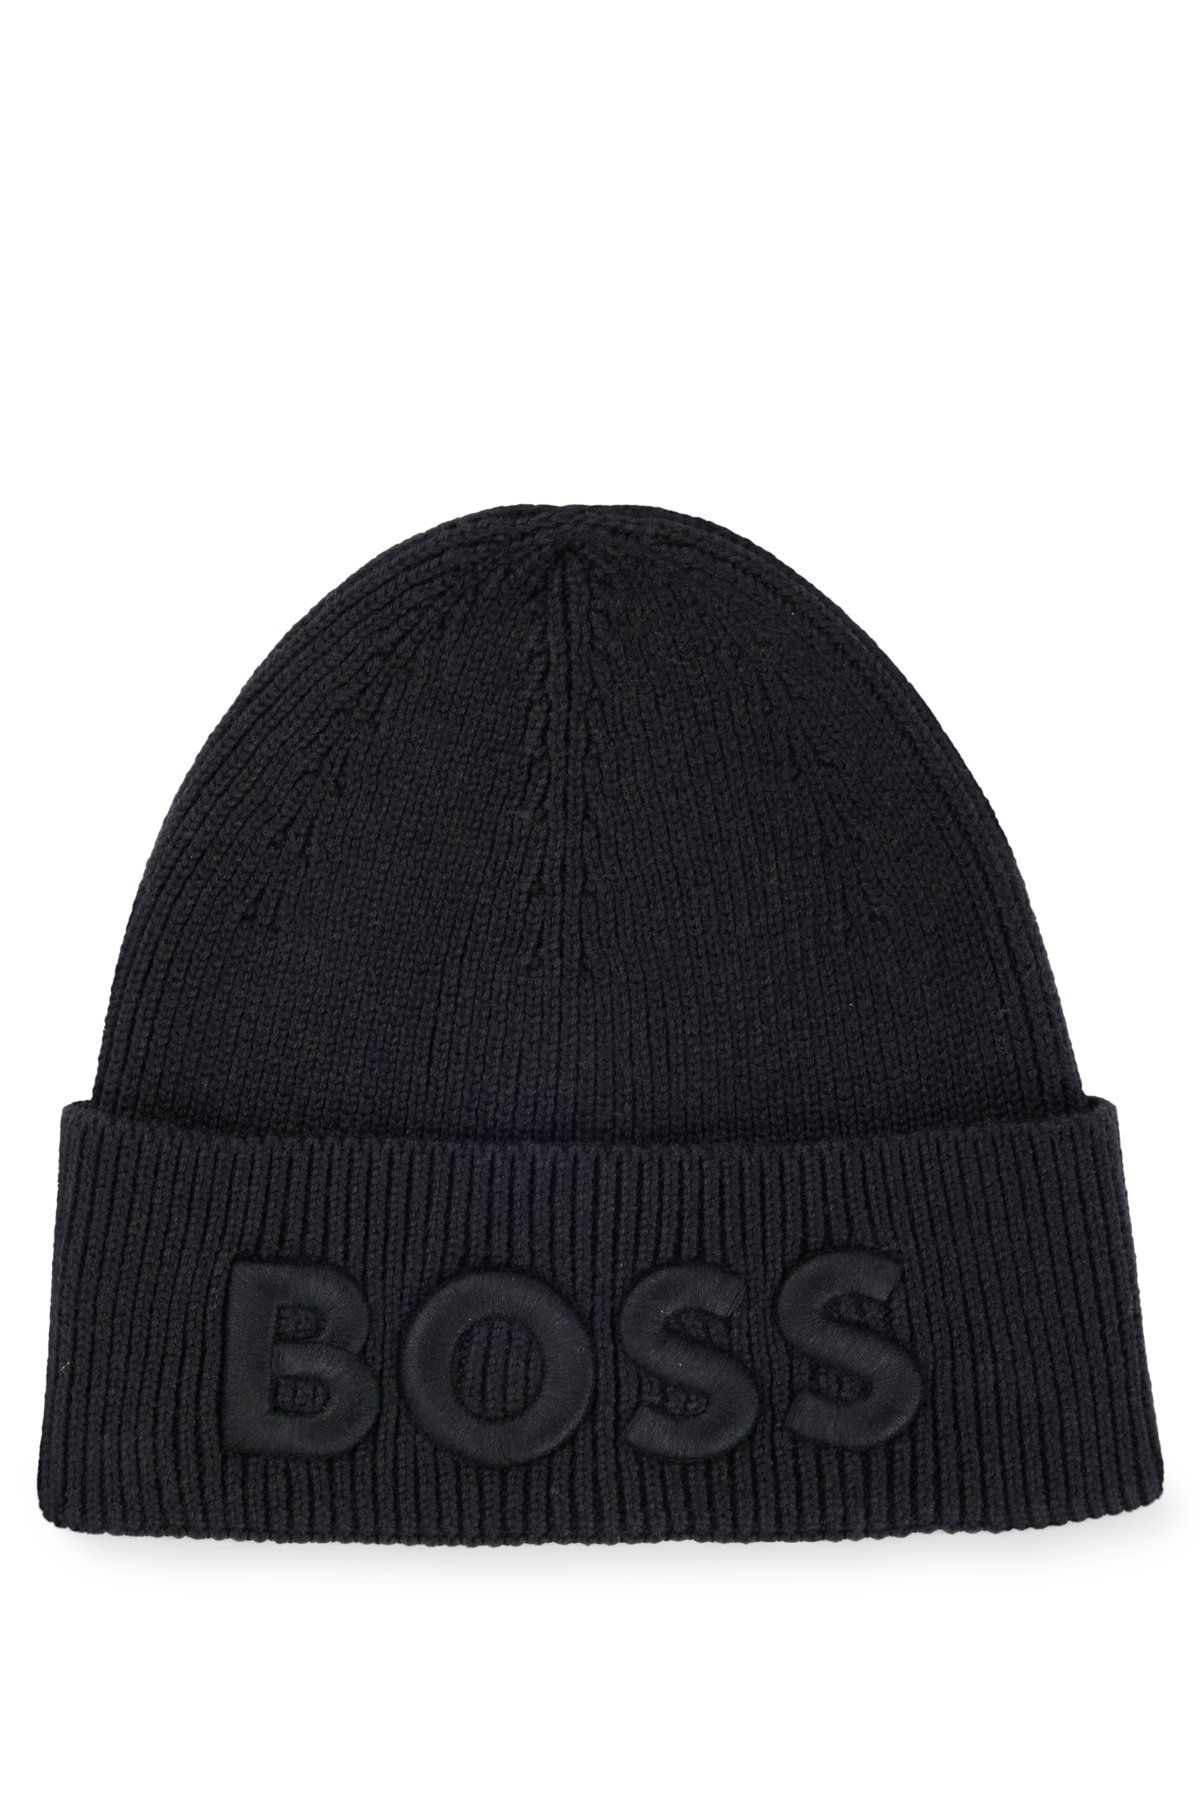 BOSS - Logo-embroidered cotton beanie in and hat wool